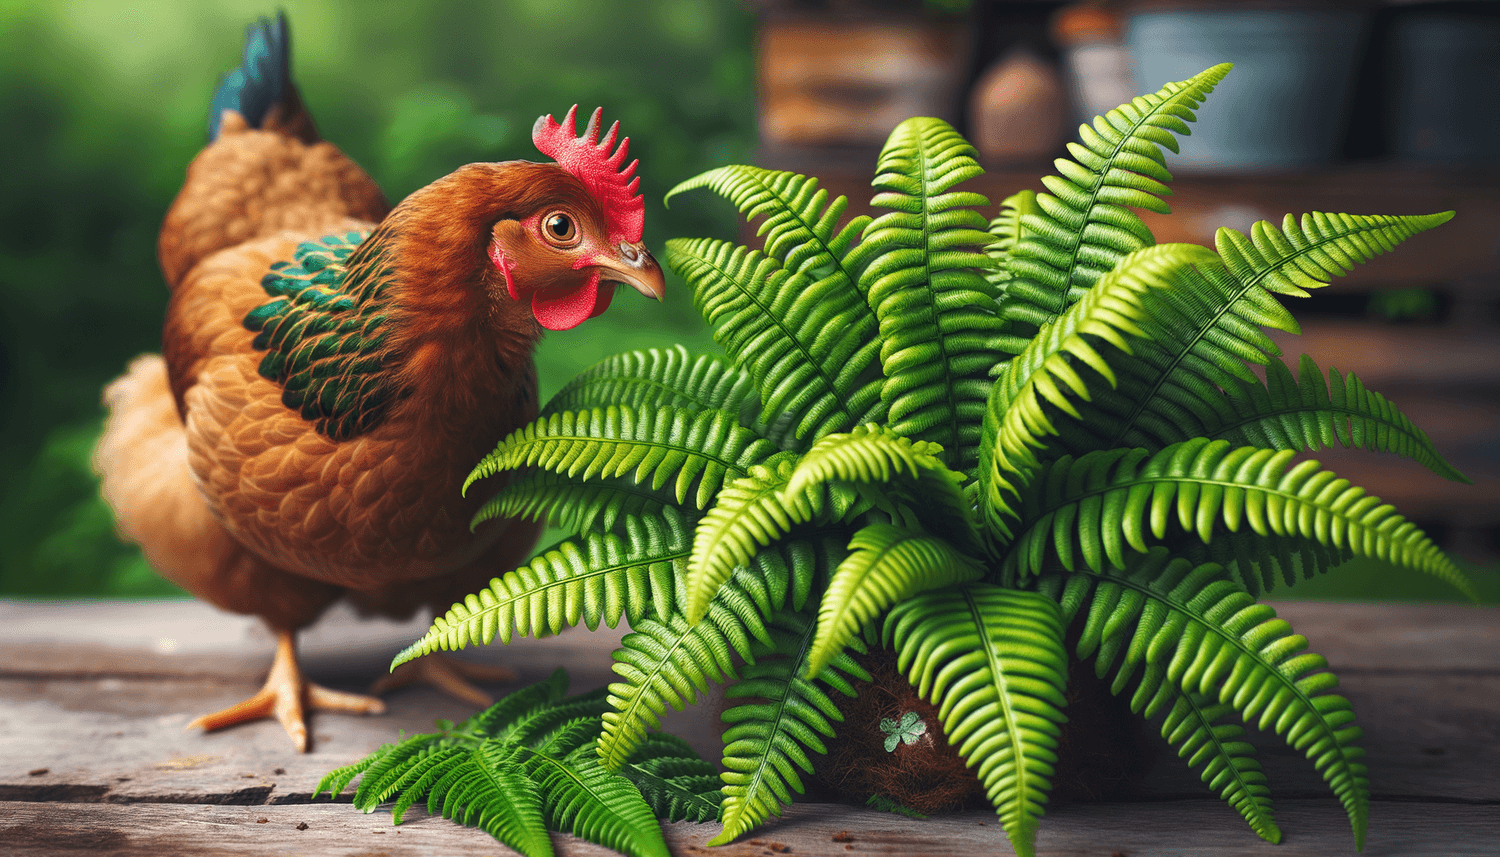 Can Chickens Eat Boston Ferns?